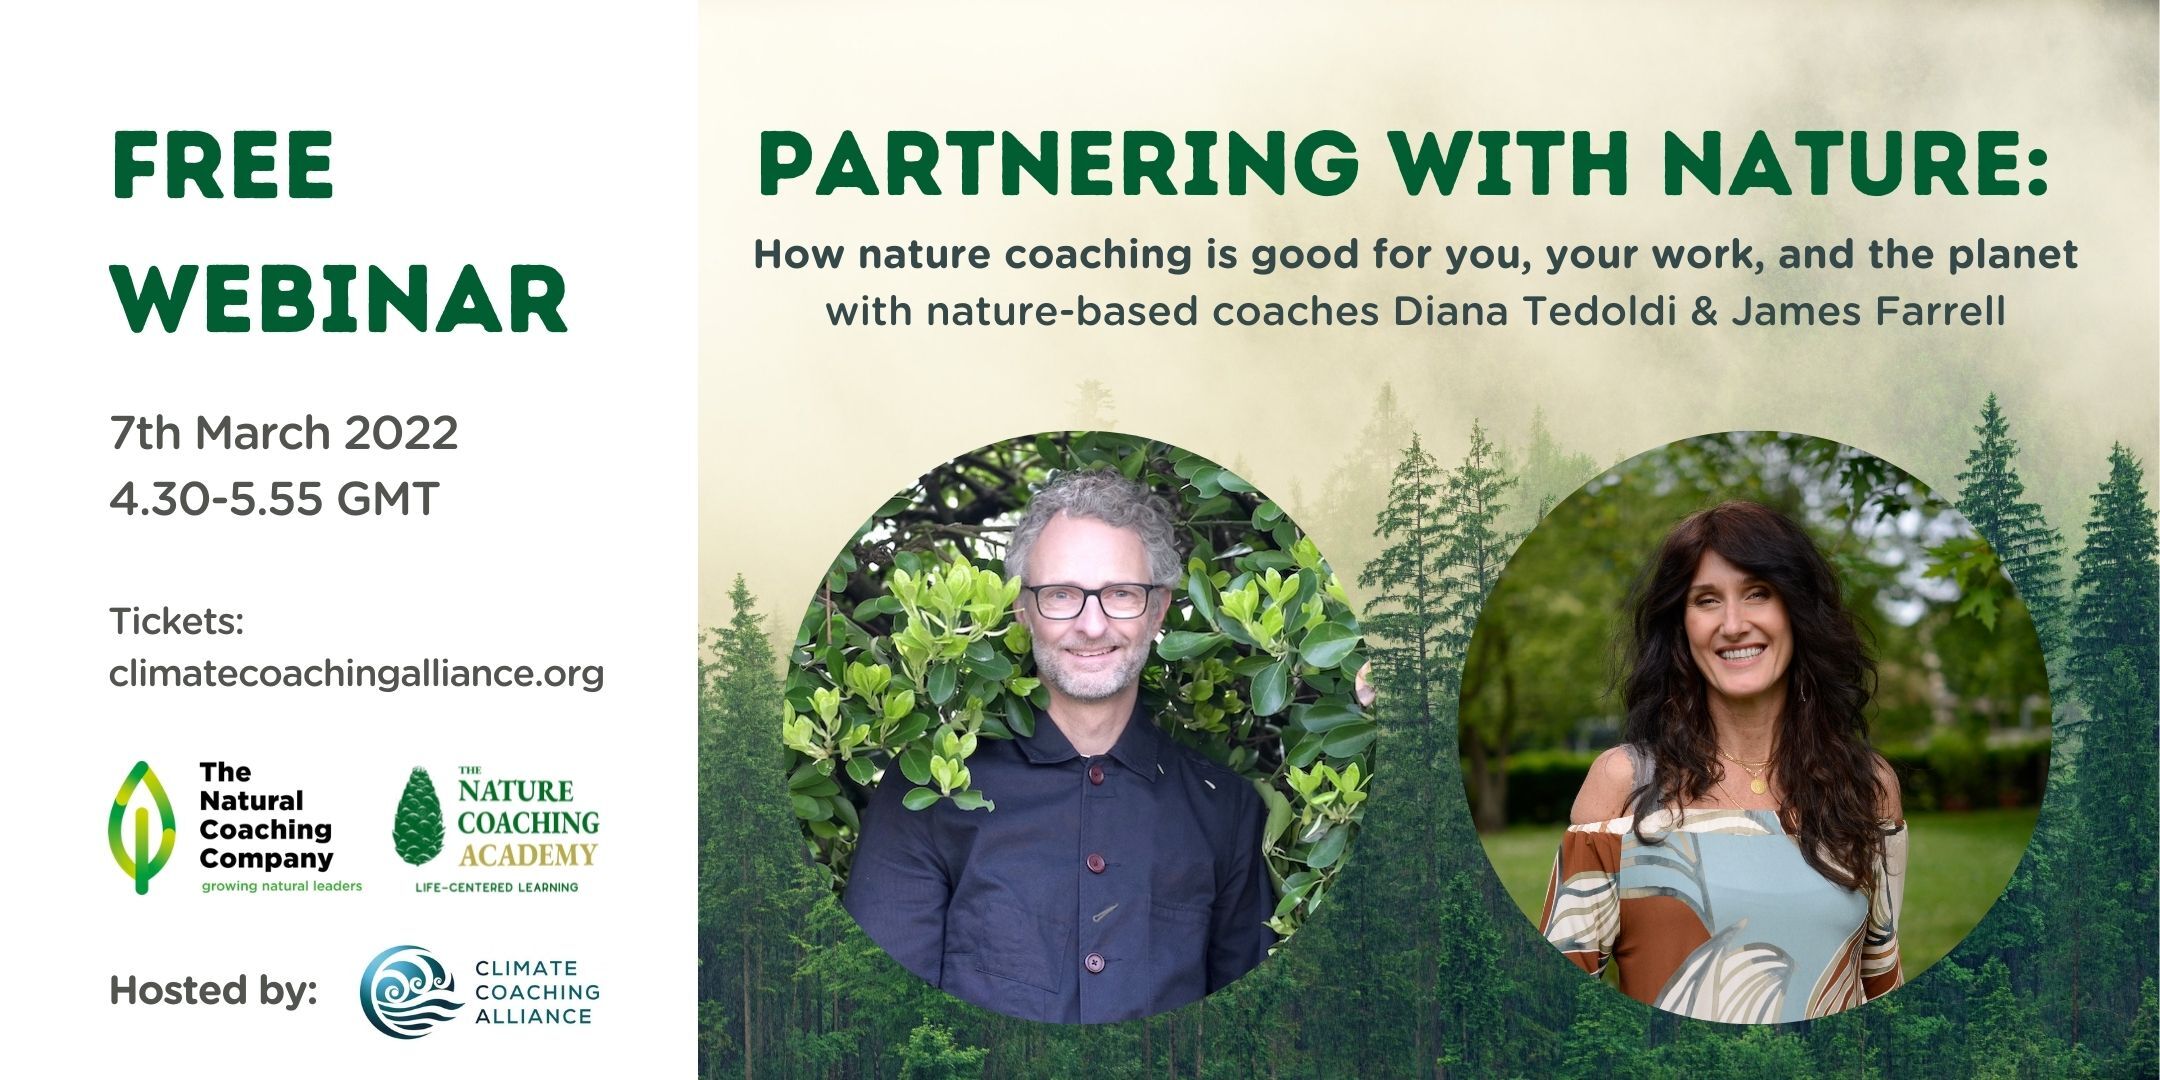 Partnering with nature: How nature coaching is good for you, your work, and the planet